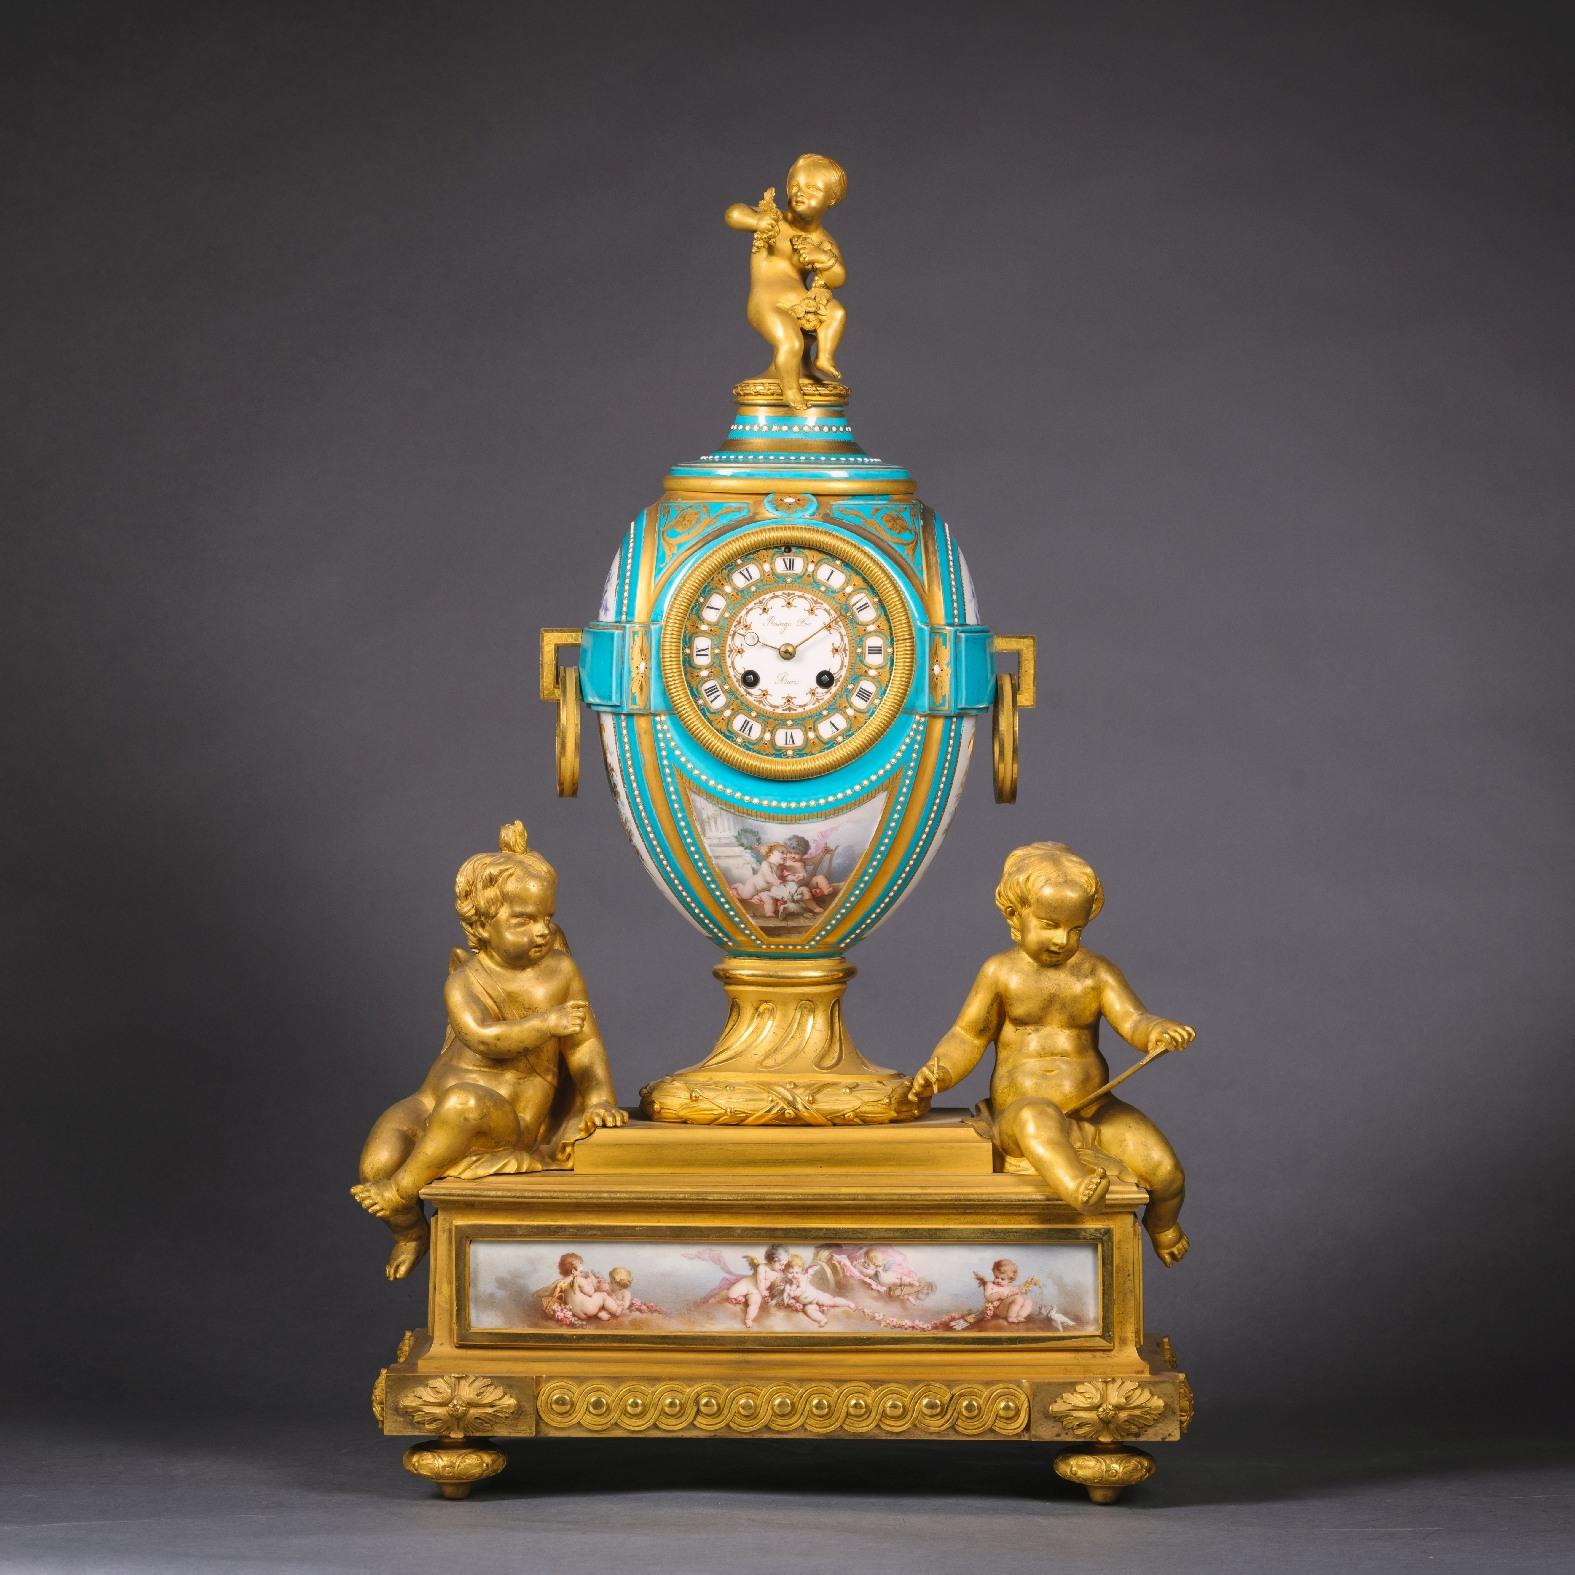 A fine Napoleon III gilt bronze and porcelain three piece clock garniture by Raingo Freres. The circular gilt and 'jewel' decorated porcelain dial of the clock with Roman numerals and signed 'Raingo Freres/Paris'. The ovoid case is painted with a